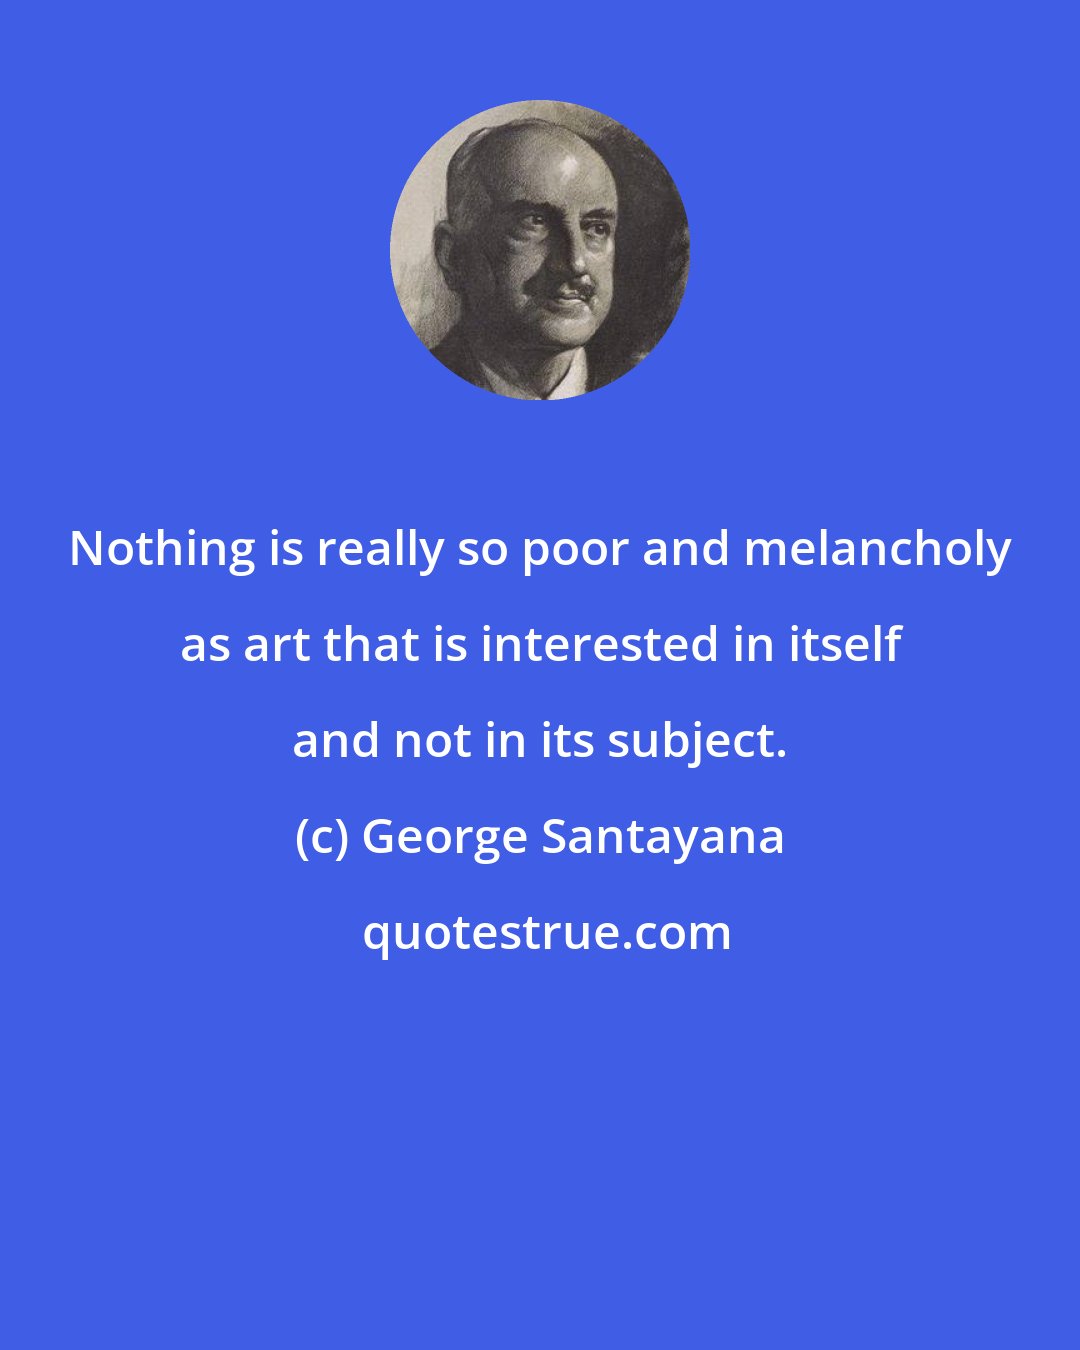 George Santayana: Nothing is really so poor and melancholy as art that is interested in itself and not in its subject.